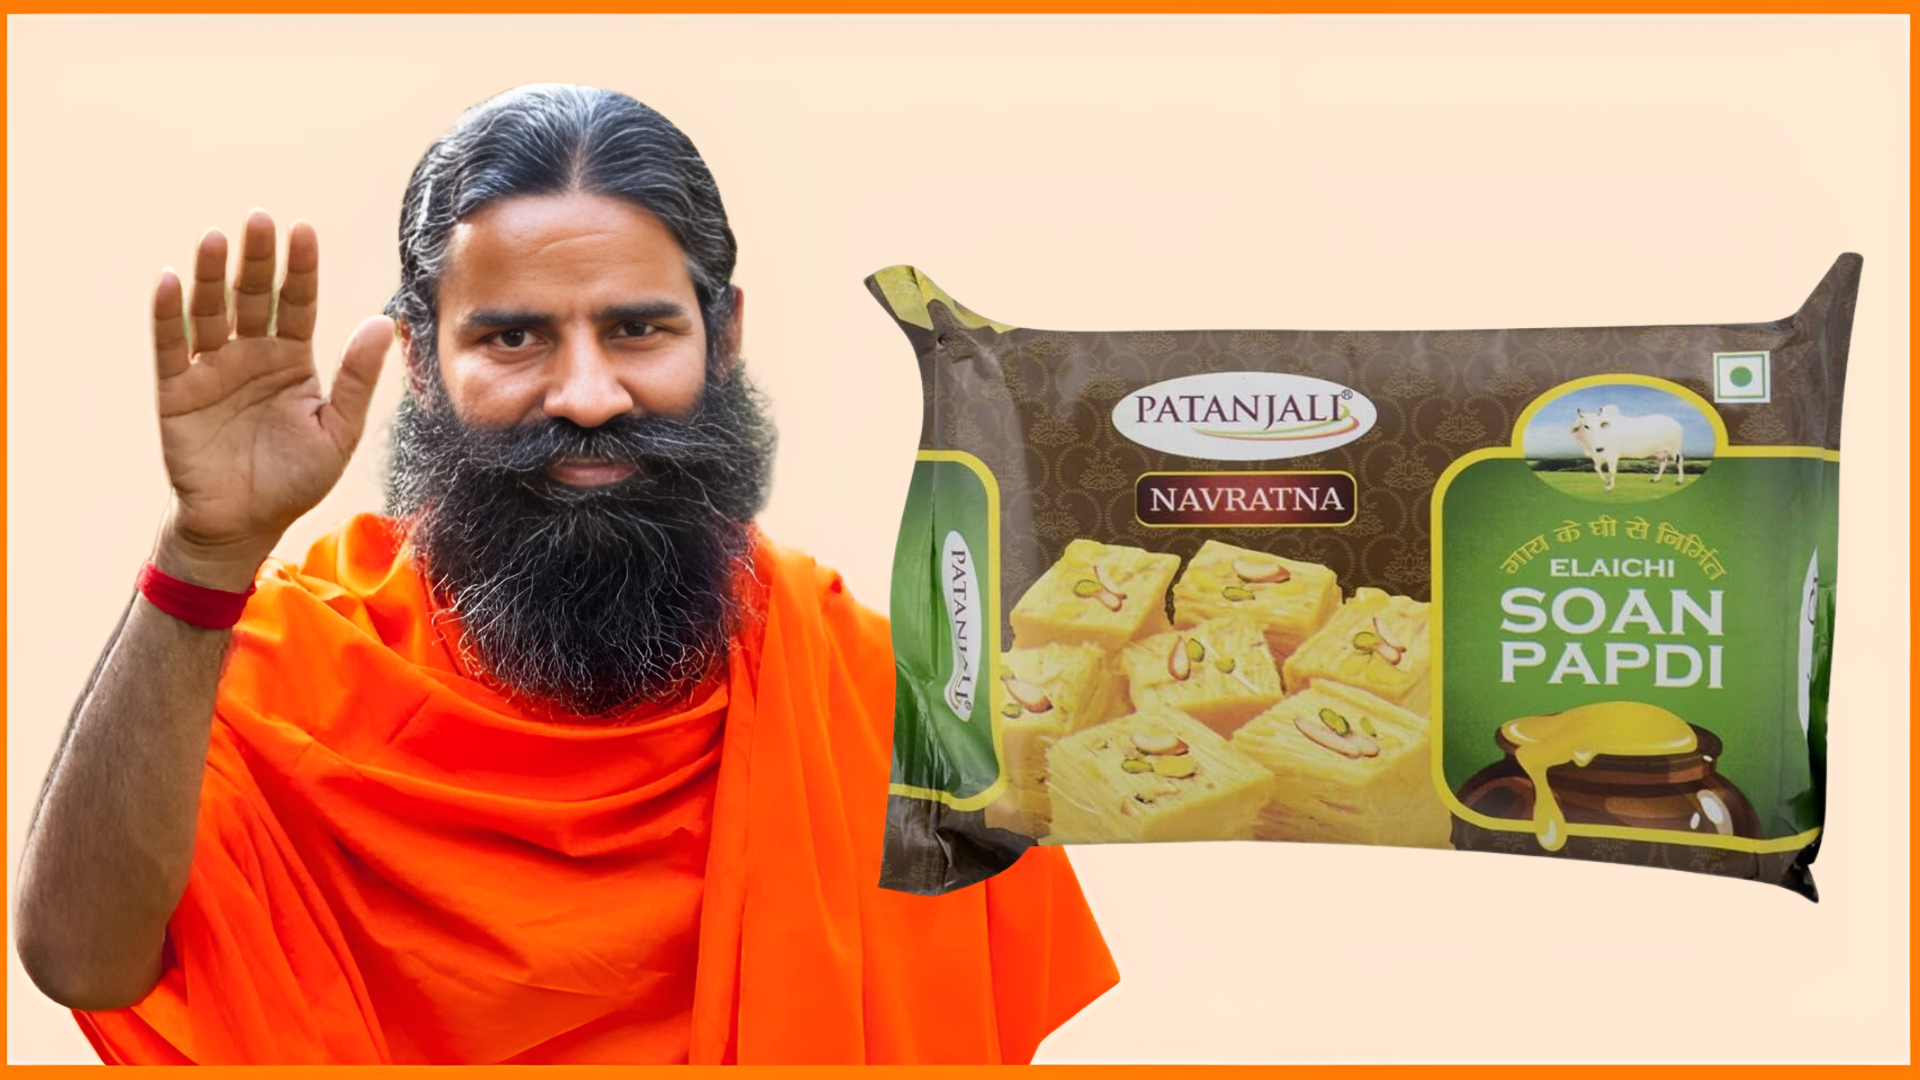 Patanjali Fails Soan Papdi Quality Test, Pataljali Official Sentenced To Six Months Of Prison